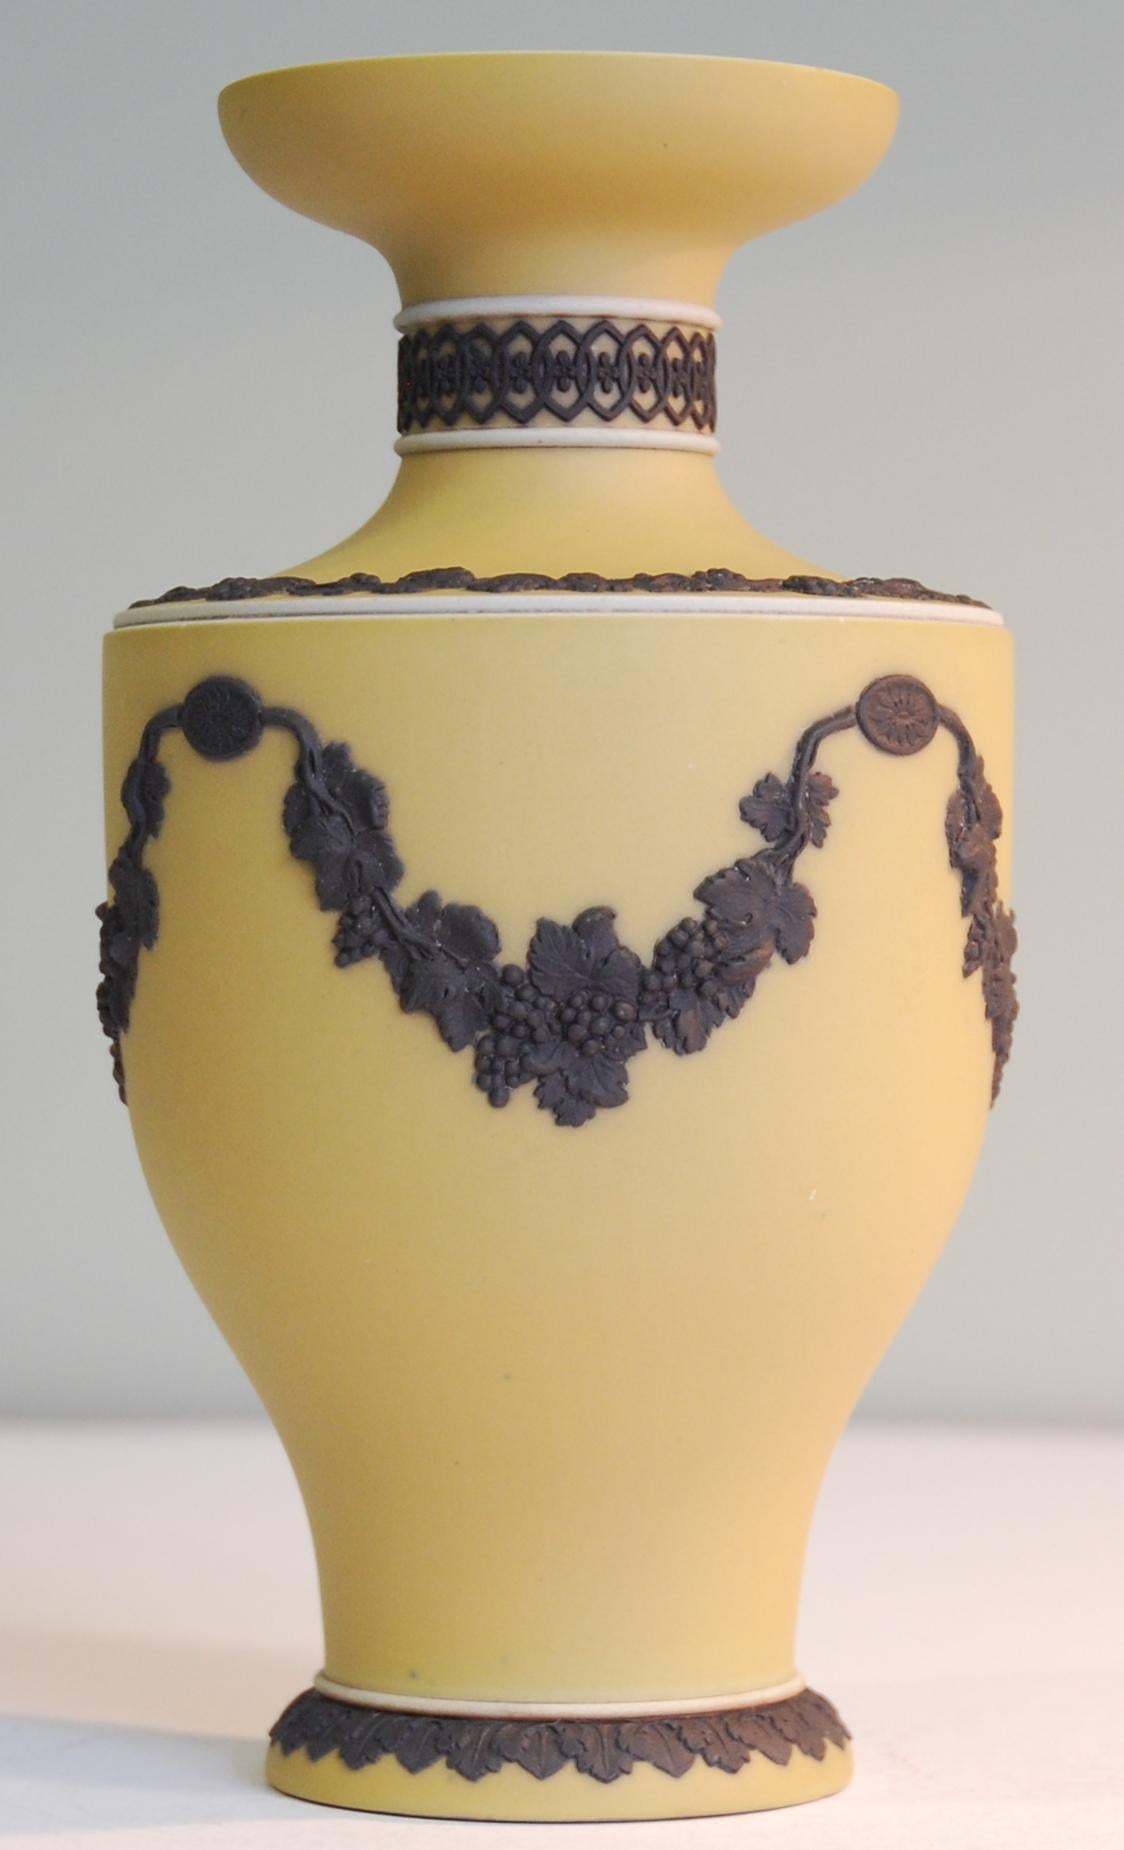 A rare shape, in the scarce buff jasper dip with black ornament. A striking and unusual combination of colours in jasperware.